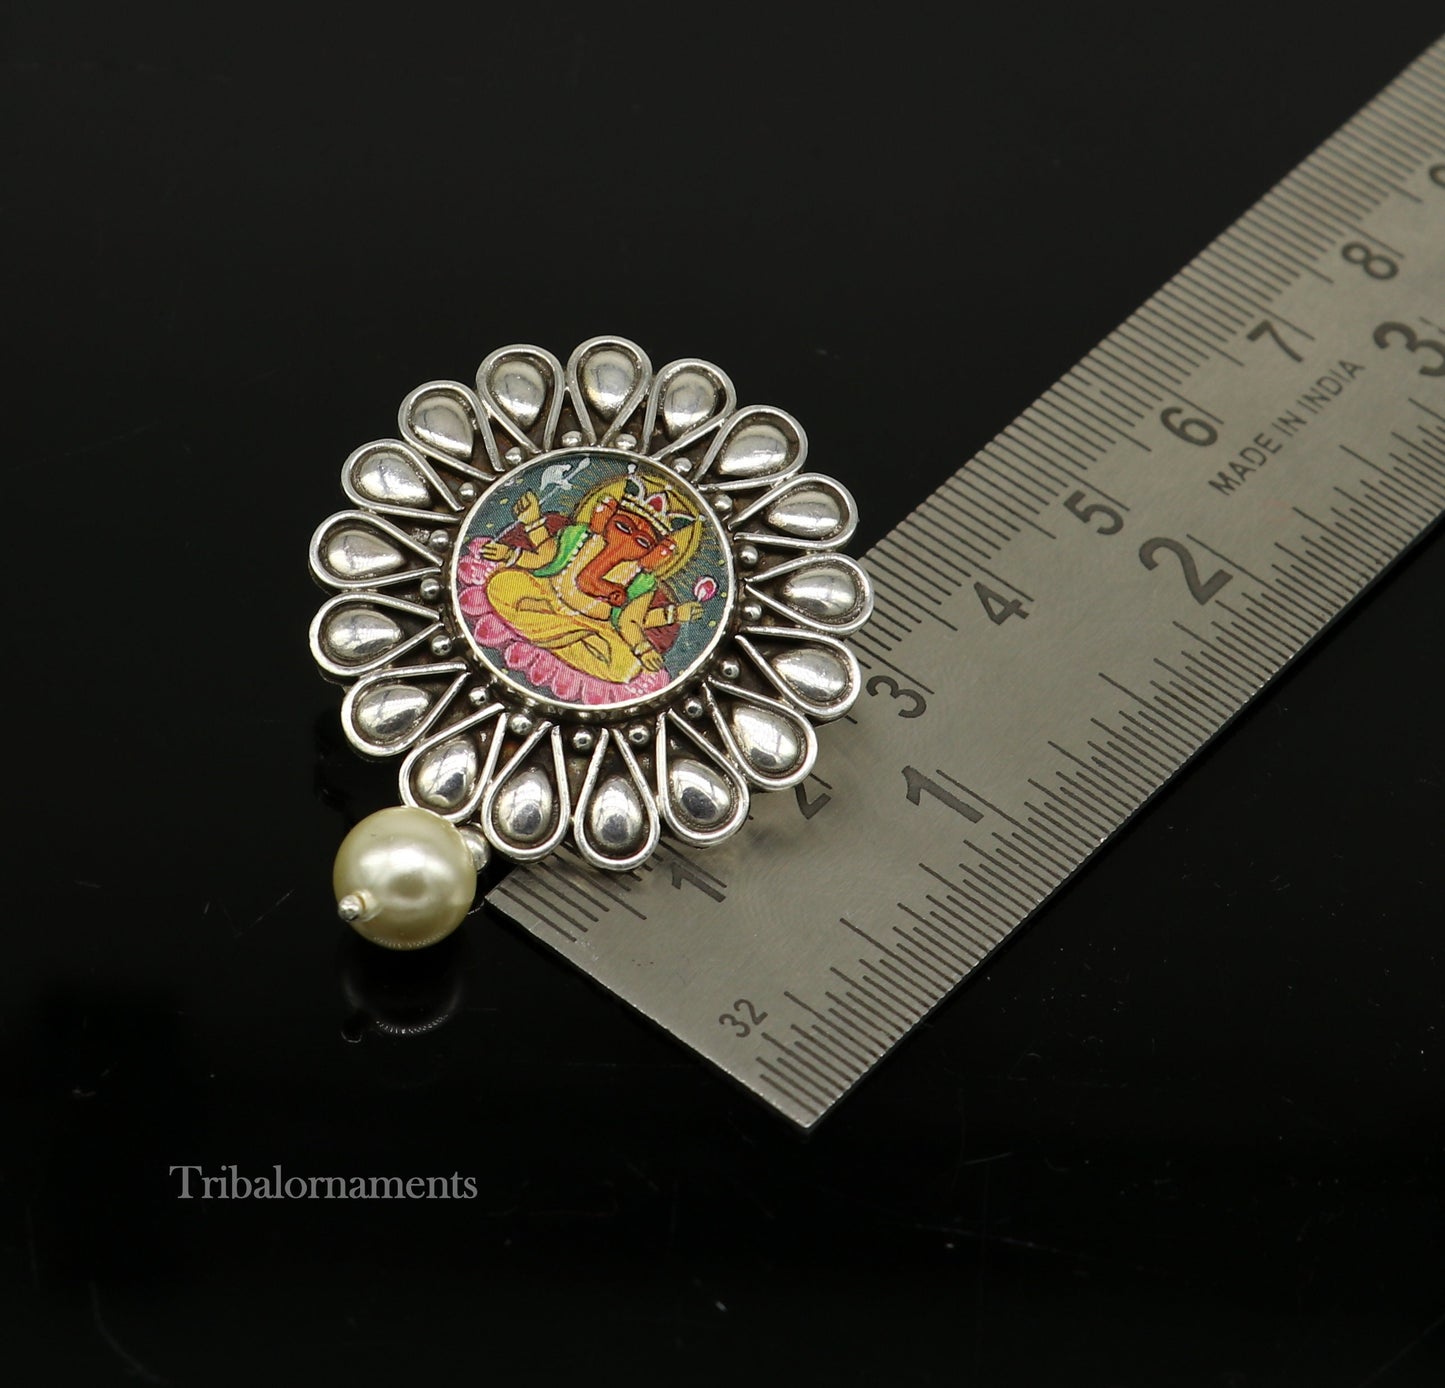 92.5 Sterling Silver Hand Painted Miniature Art Painting photo God Ganesha Glass Framed Stud earring ethnic stylish tribal jewelry ear1032 - TRIBAL ORNAMENTS